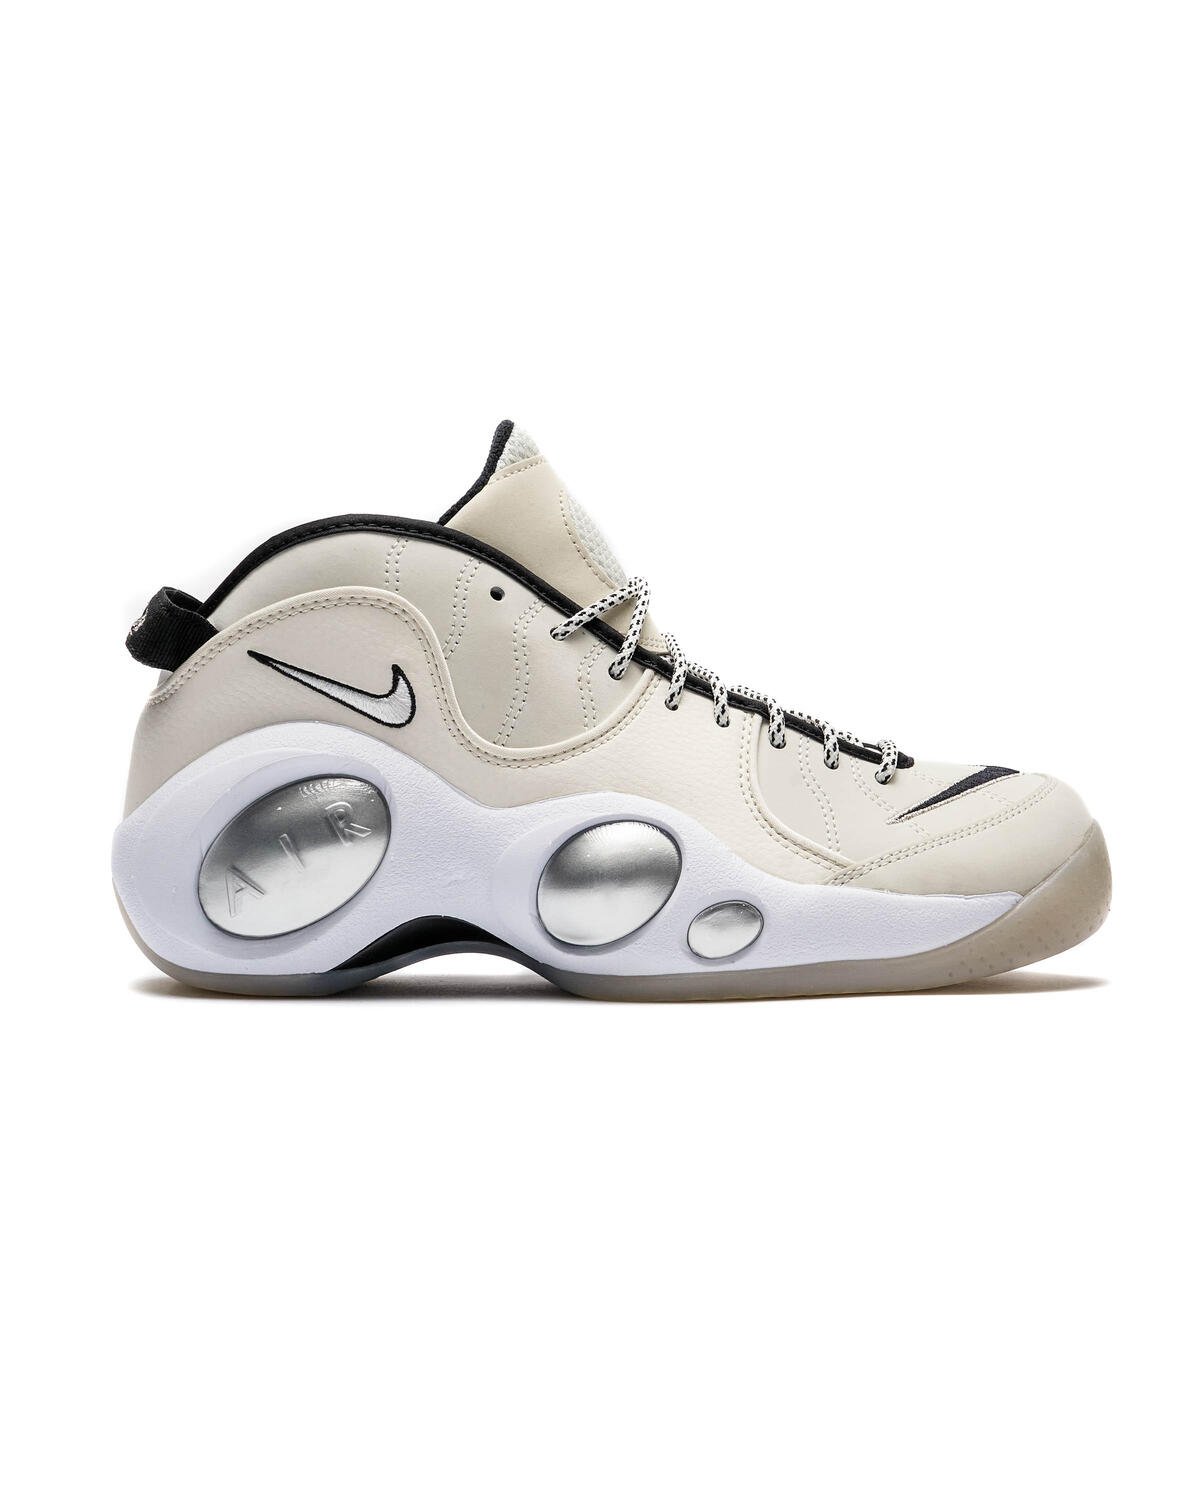 nike zoom flight 95 cheap price philippines today